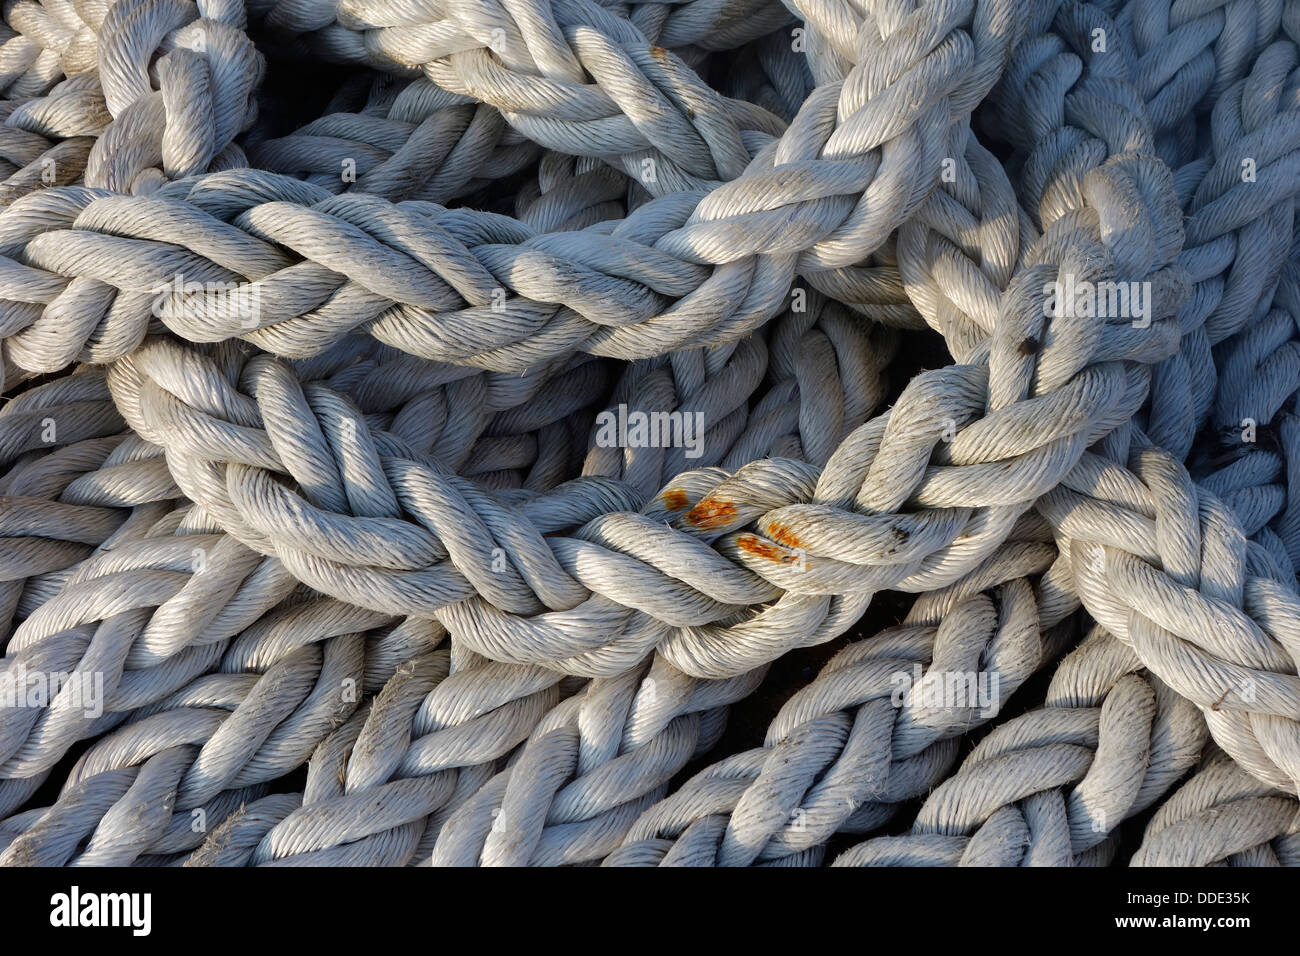 Brait / plaited rope / braided rope used as hawser or mooring warp for fishing boat Stock Photo